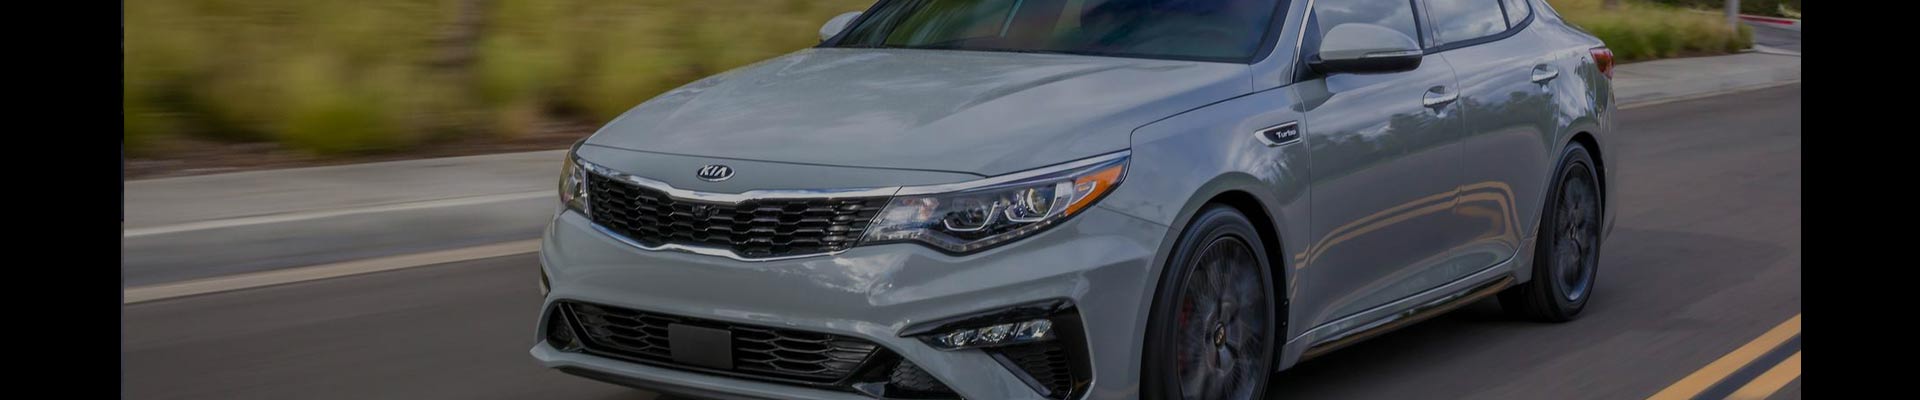 Shop Replacement and OEM 2019 Kia Optima Parts with Discounted Price on the Net